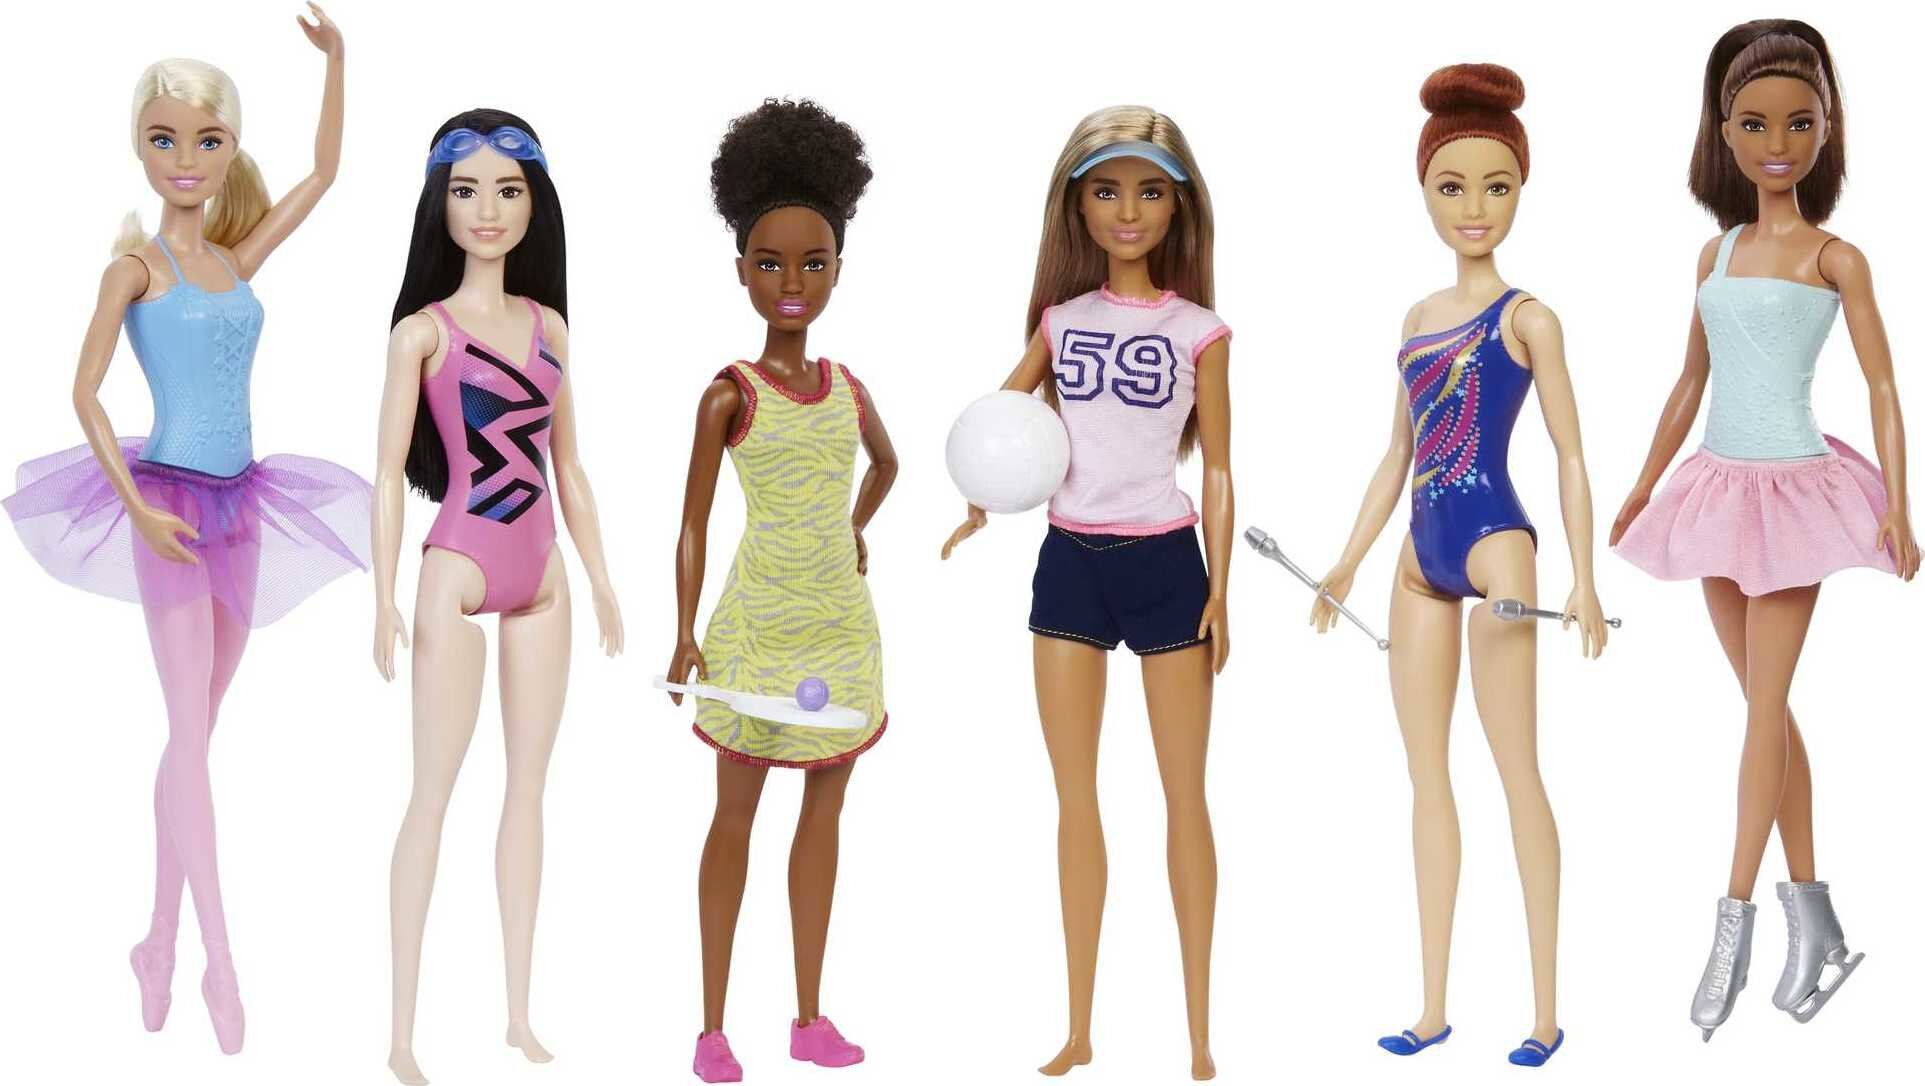 Barbie Doll Careers 6 Pack, Doll Collection Set with Related Career Outfits & Accessories - image 1 of 6